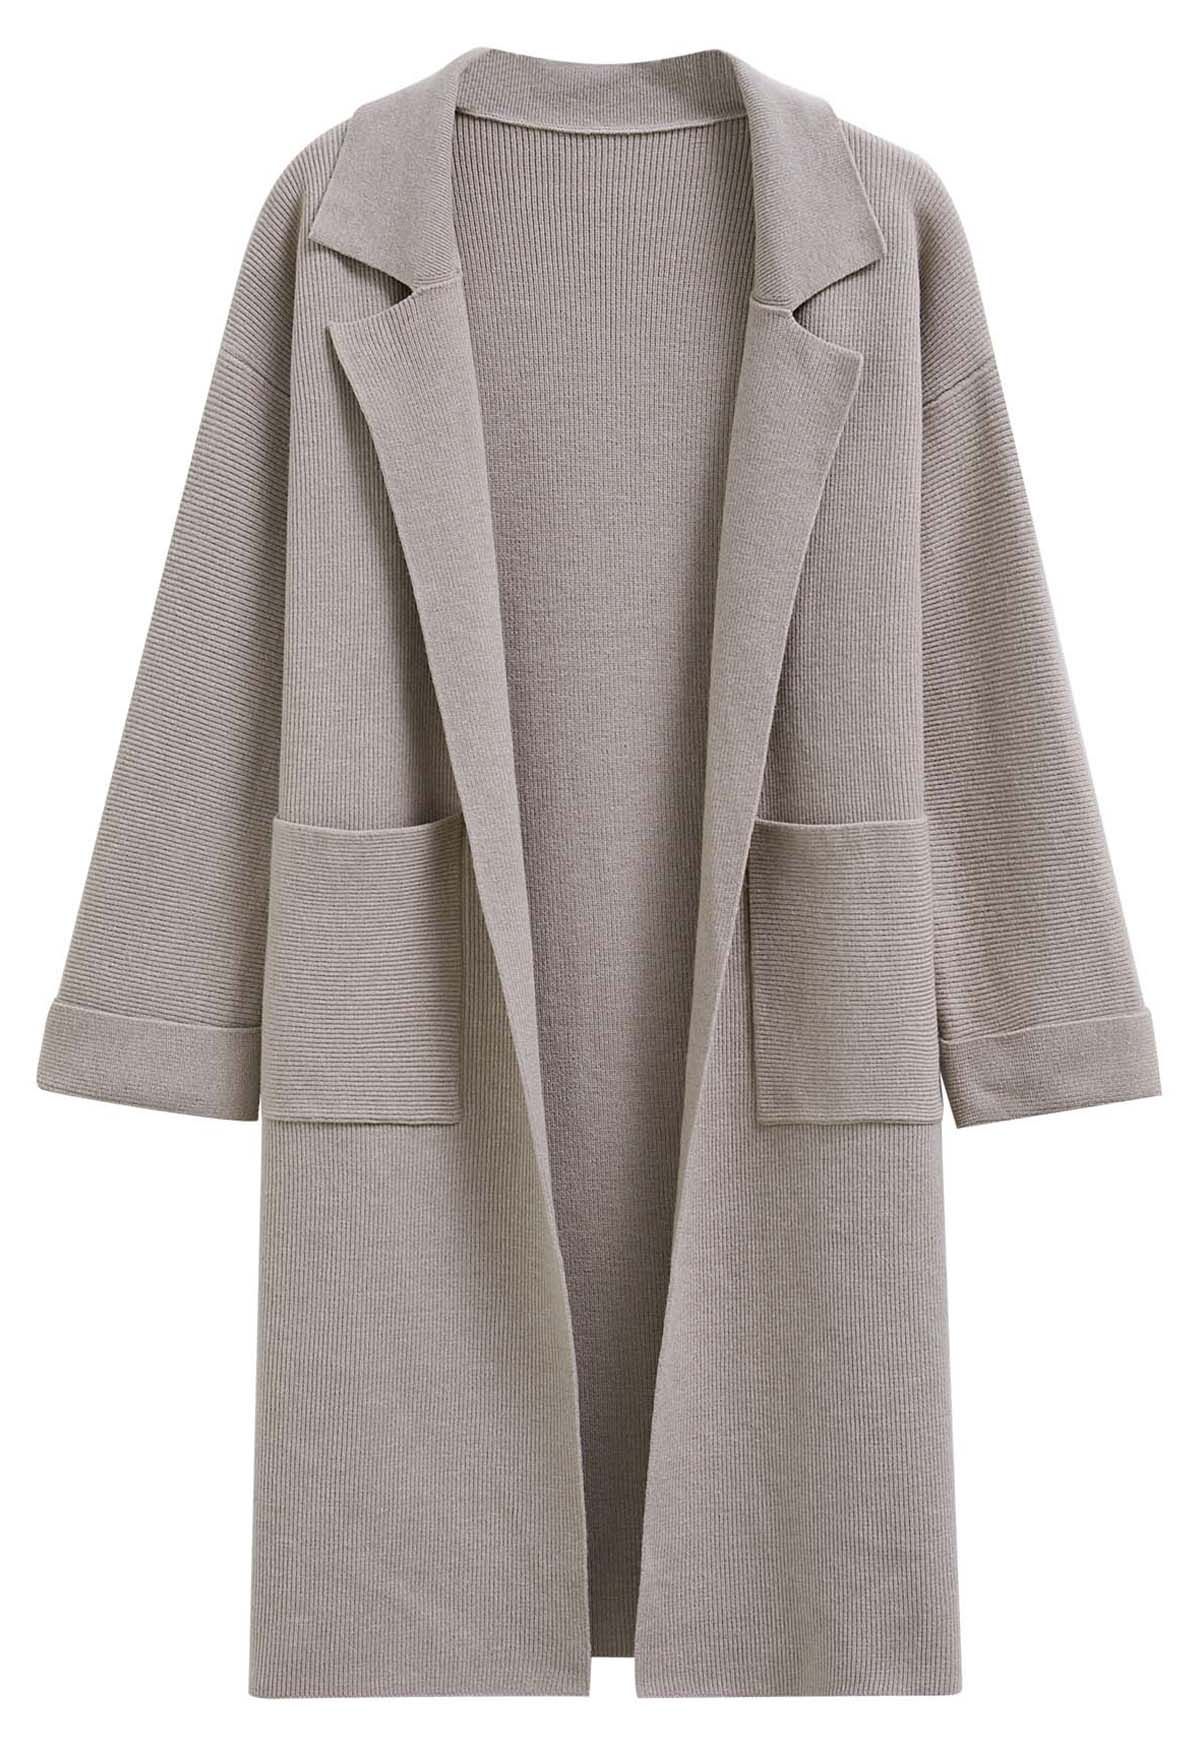 Notch Lapel Belted Longline Knit Cardigan in Taupe